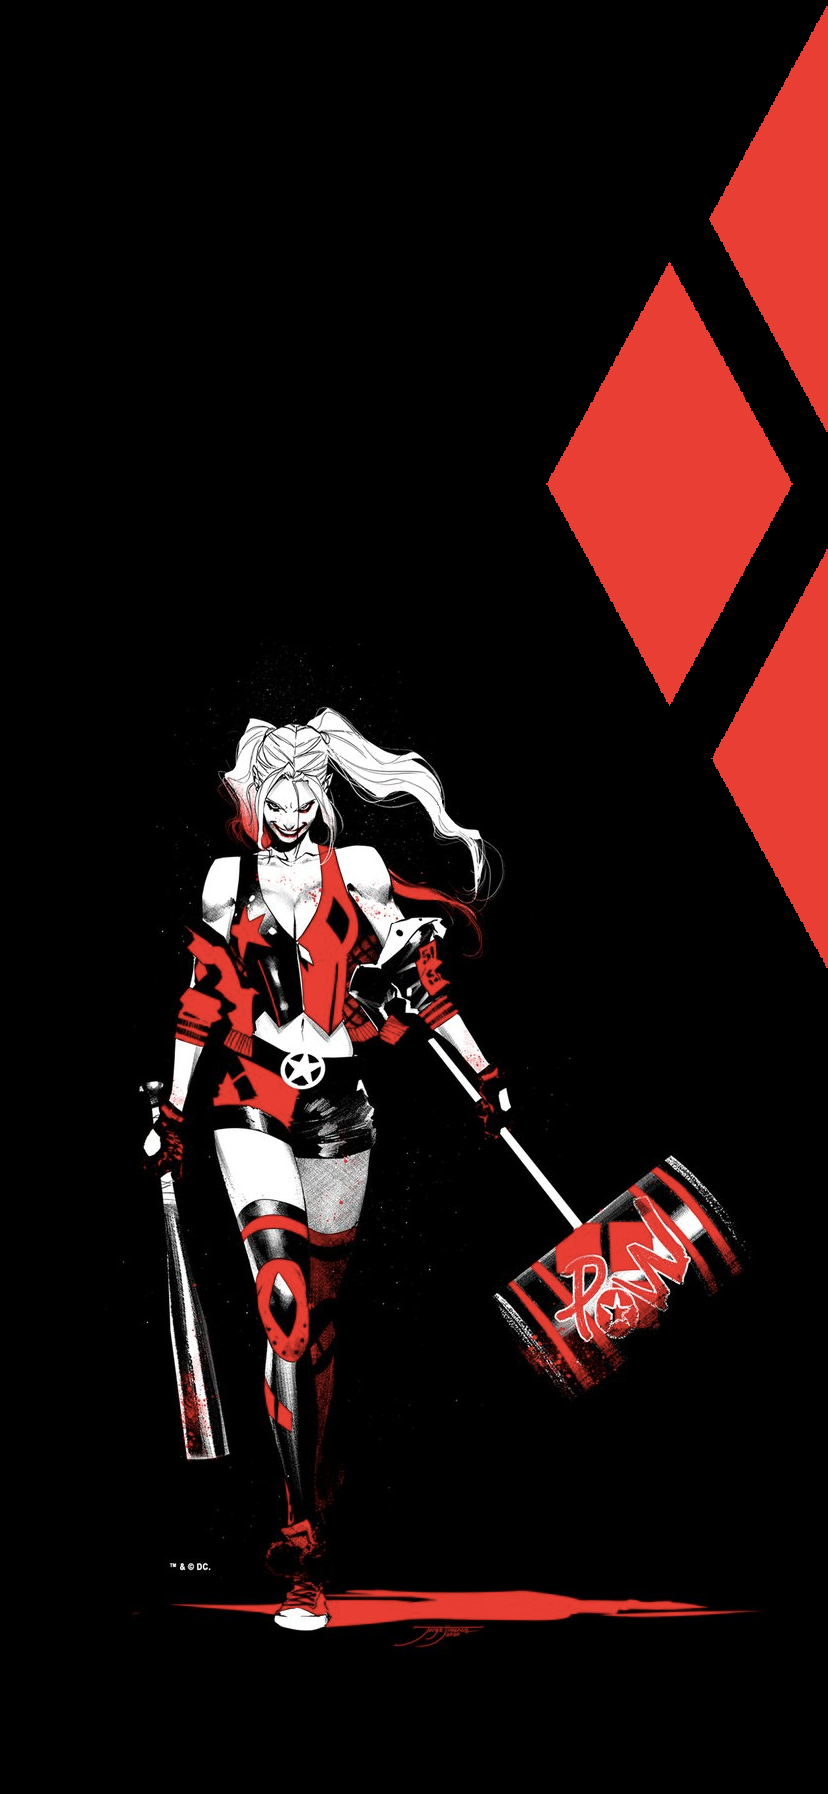 Made up a simple Harley Quinn phone wallpaper using the new Jimenez teaser art. Hope you like!